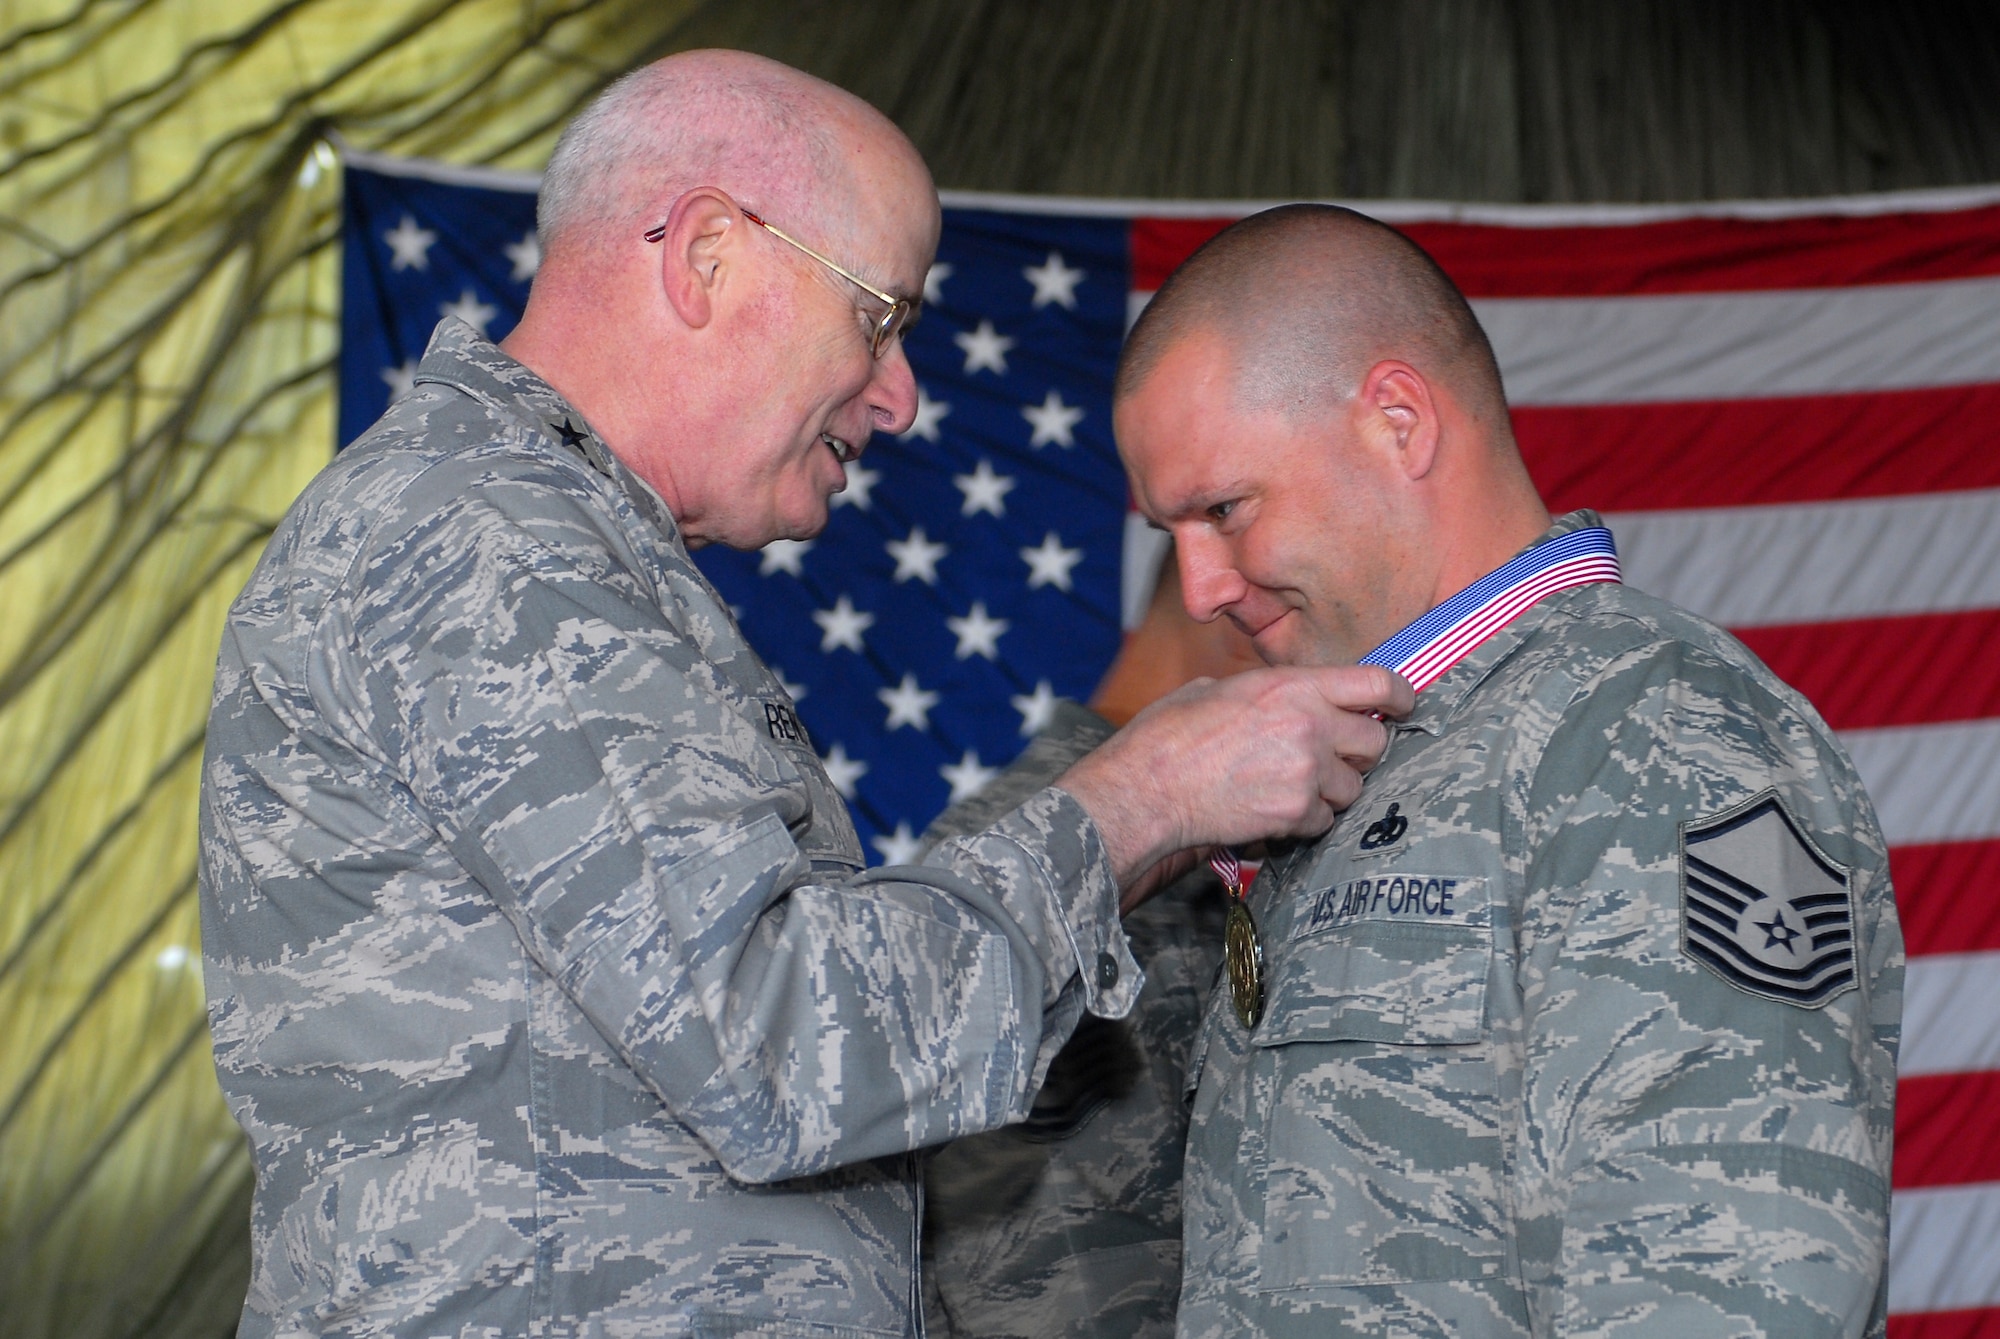 Lt. Gen. Loren Reno, Air Force deputy chief of staff for logistics, installations and mission support, congratulates Master Sgt. Joseph Monthie, a 756th Aircraft Maintenance Squadron production supervisor, on March 5th during a medallion ceremony held before the start of the maintenance professional of the year banquet.  (U.S. Air Force photo/Senior Airman Tracie Forte)